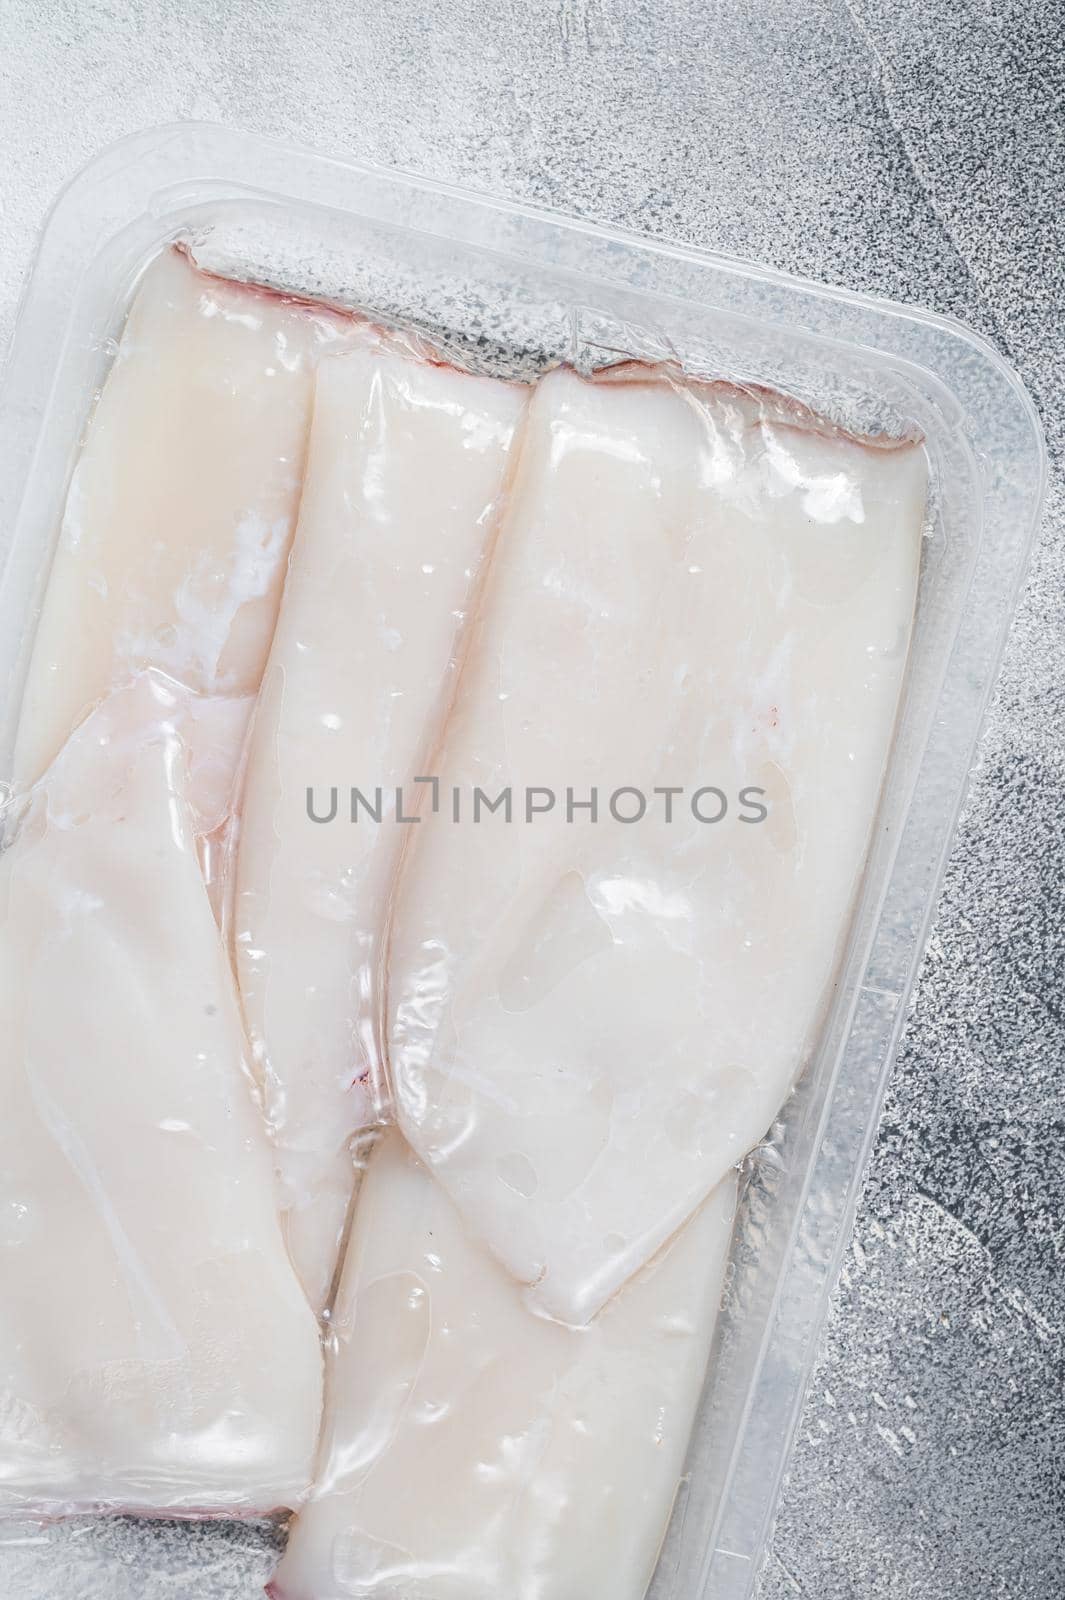 Raw squid or Calamari in a vacuum package from the supermarket. White background. Top view.